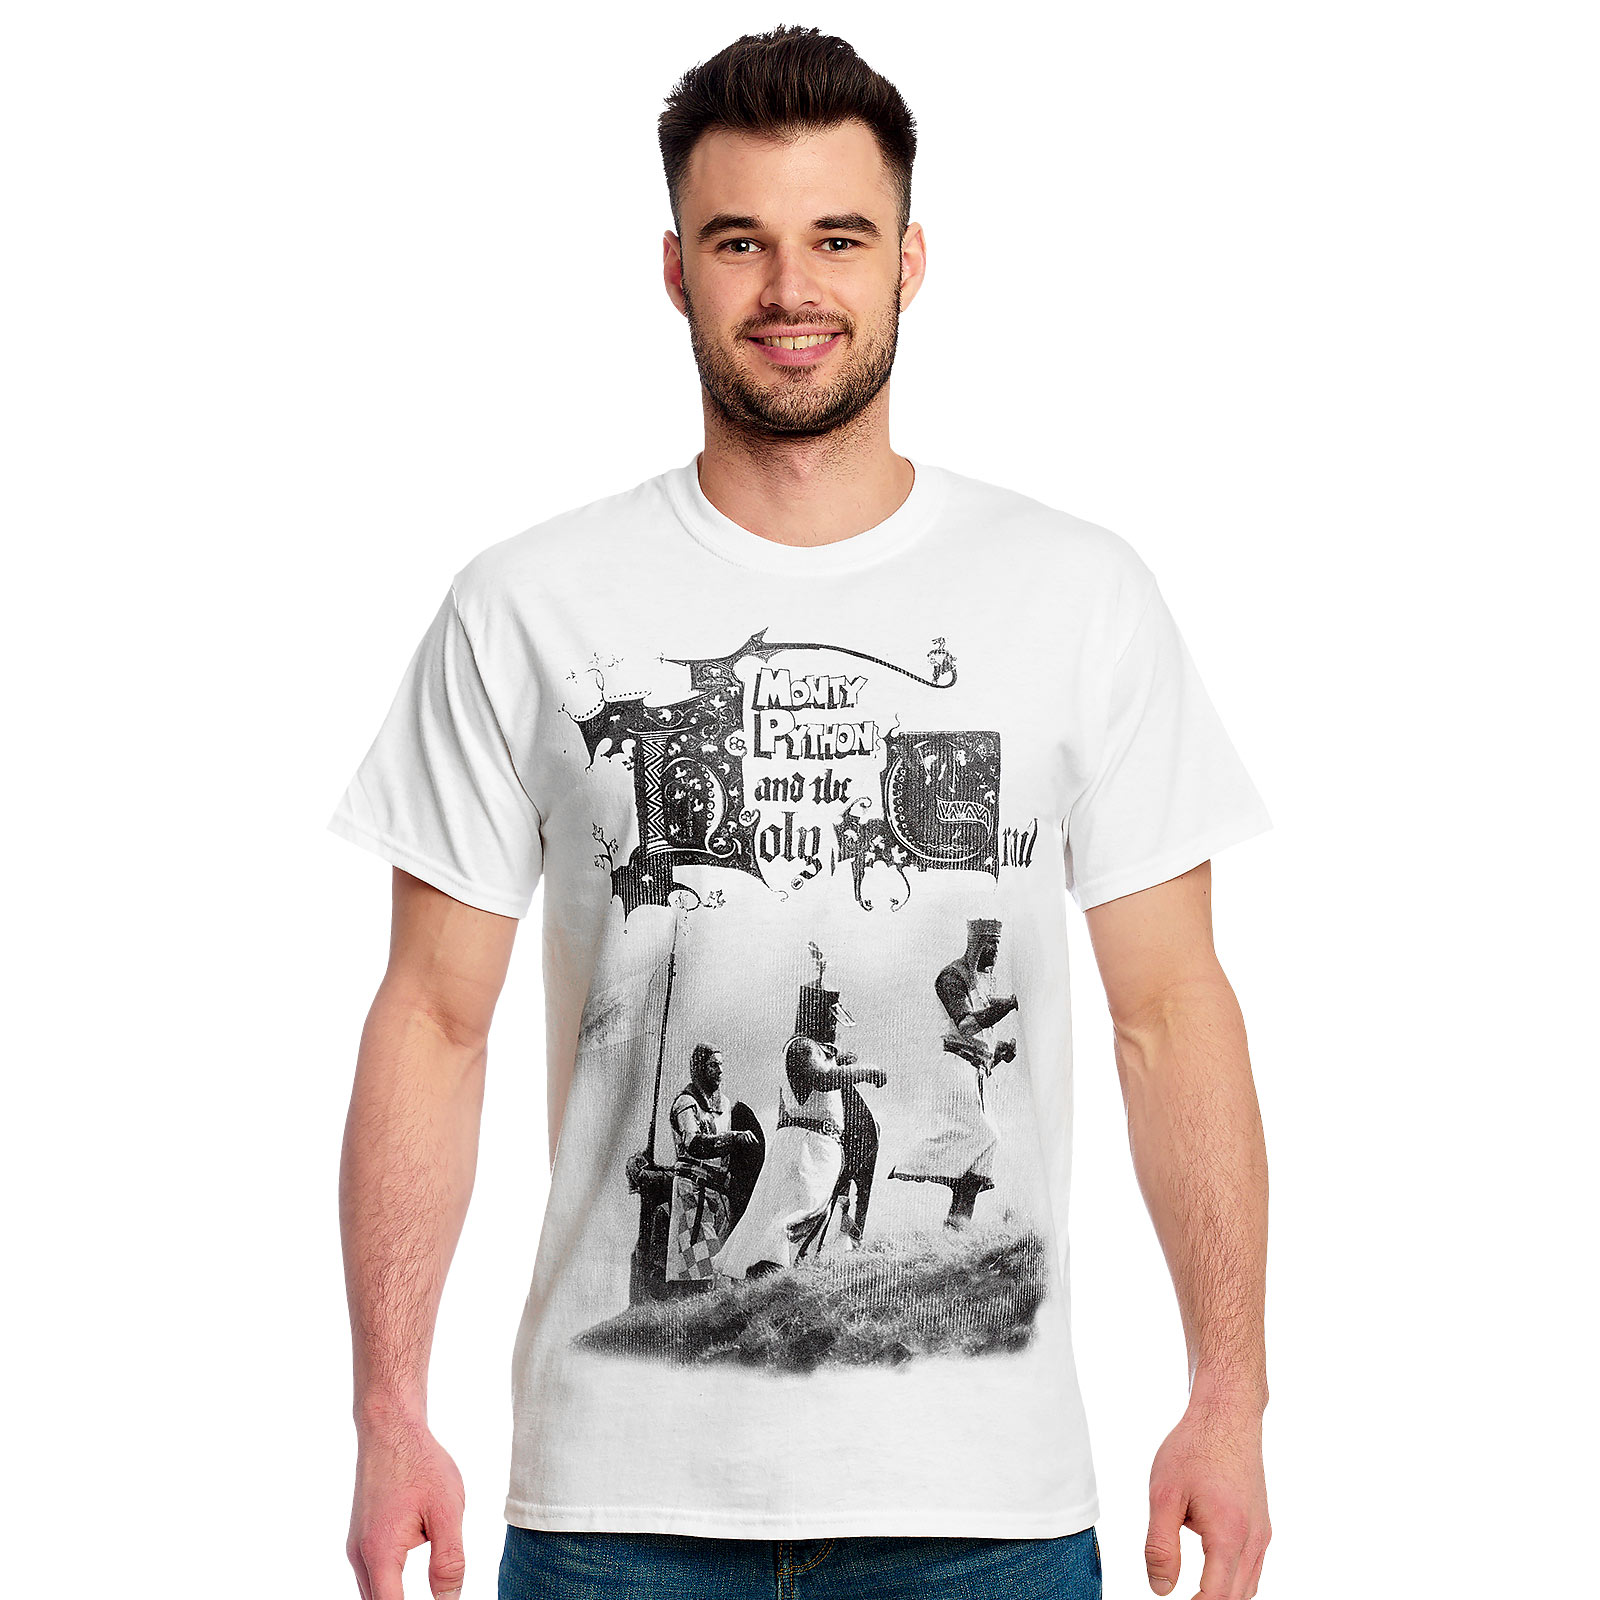 Monty Python - The Knights of the Coconut T-Shirt white